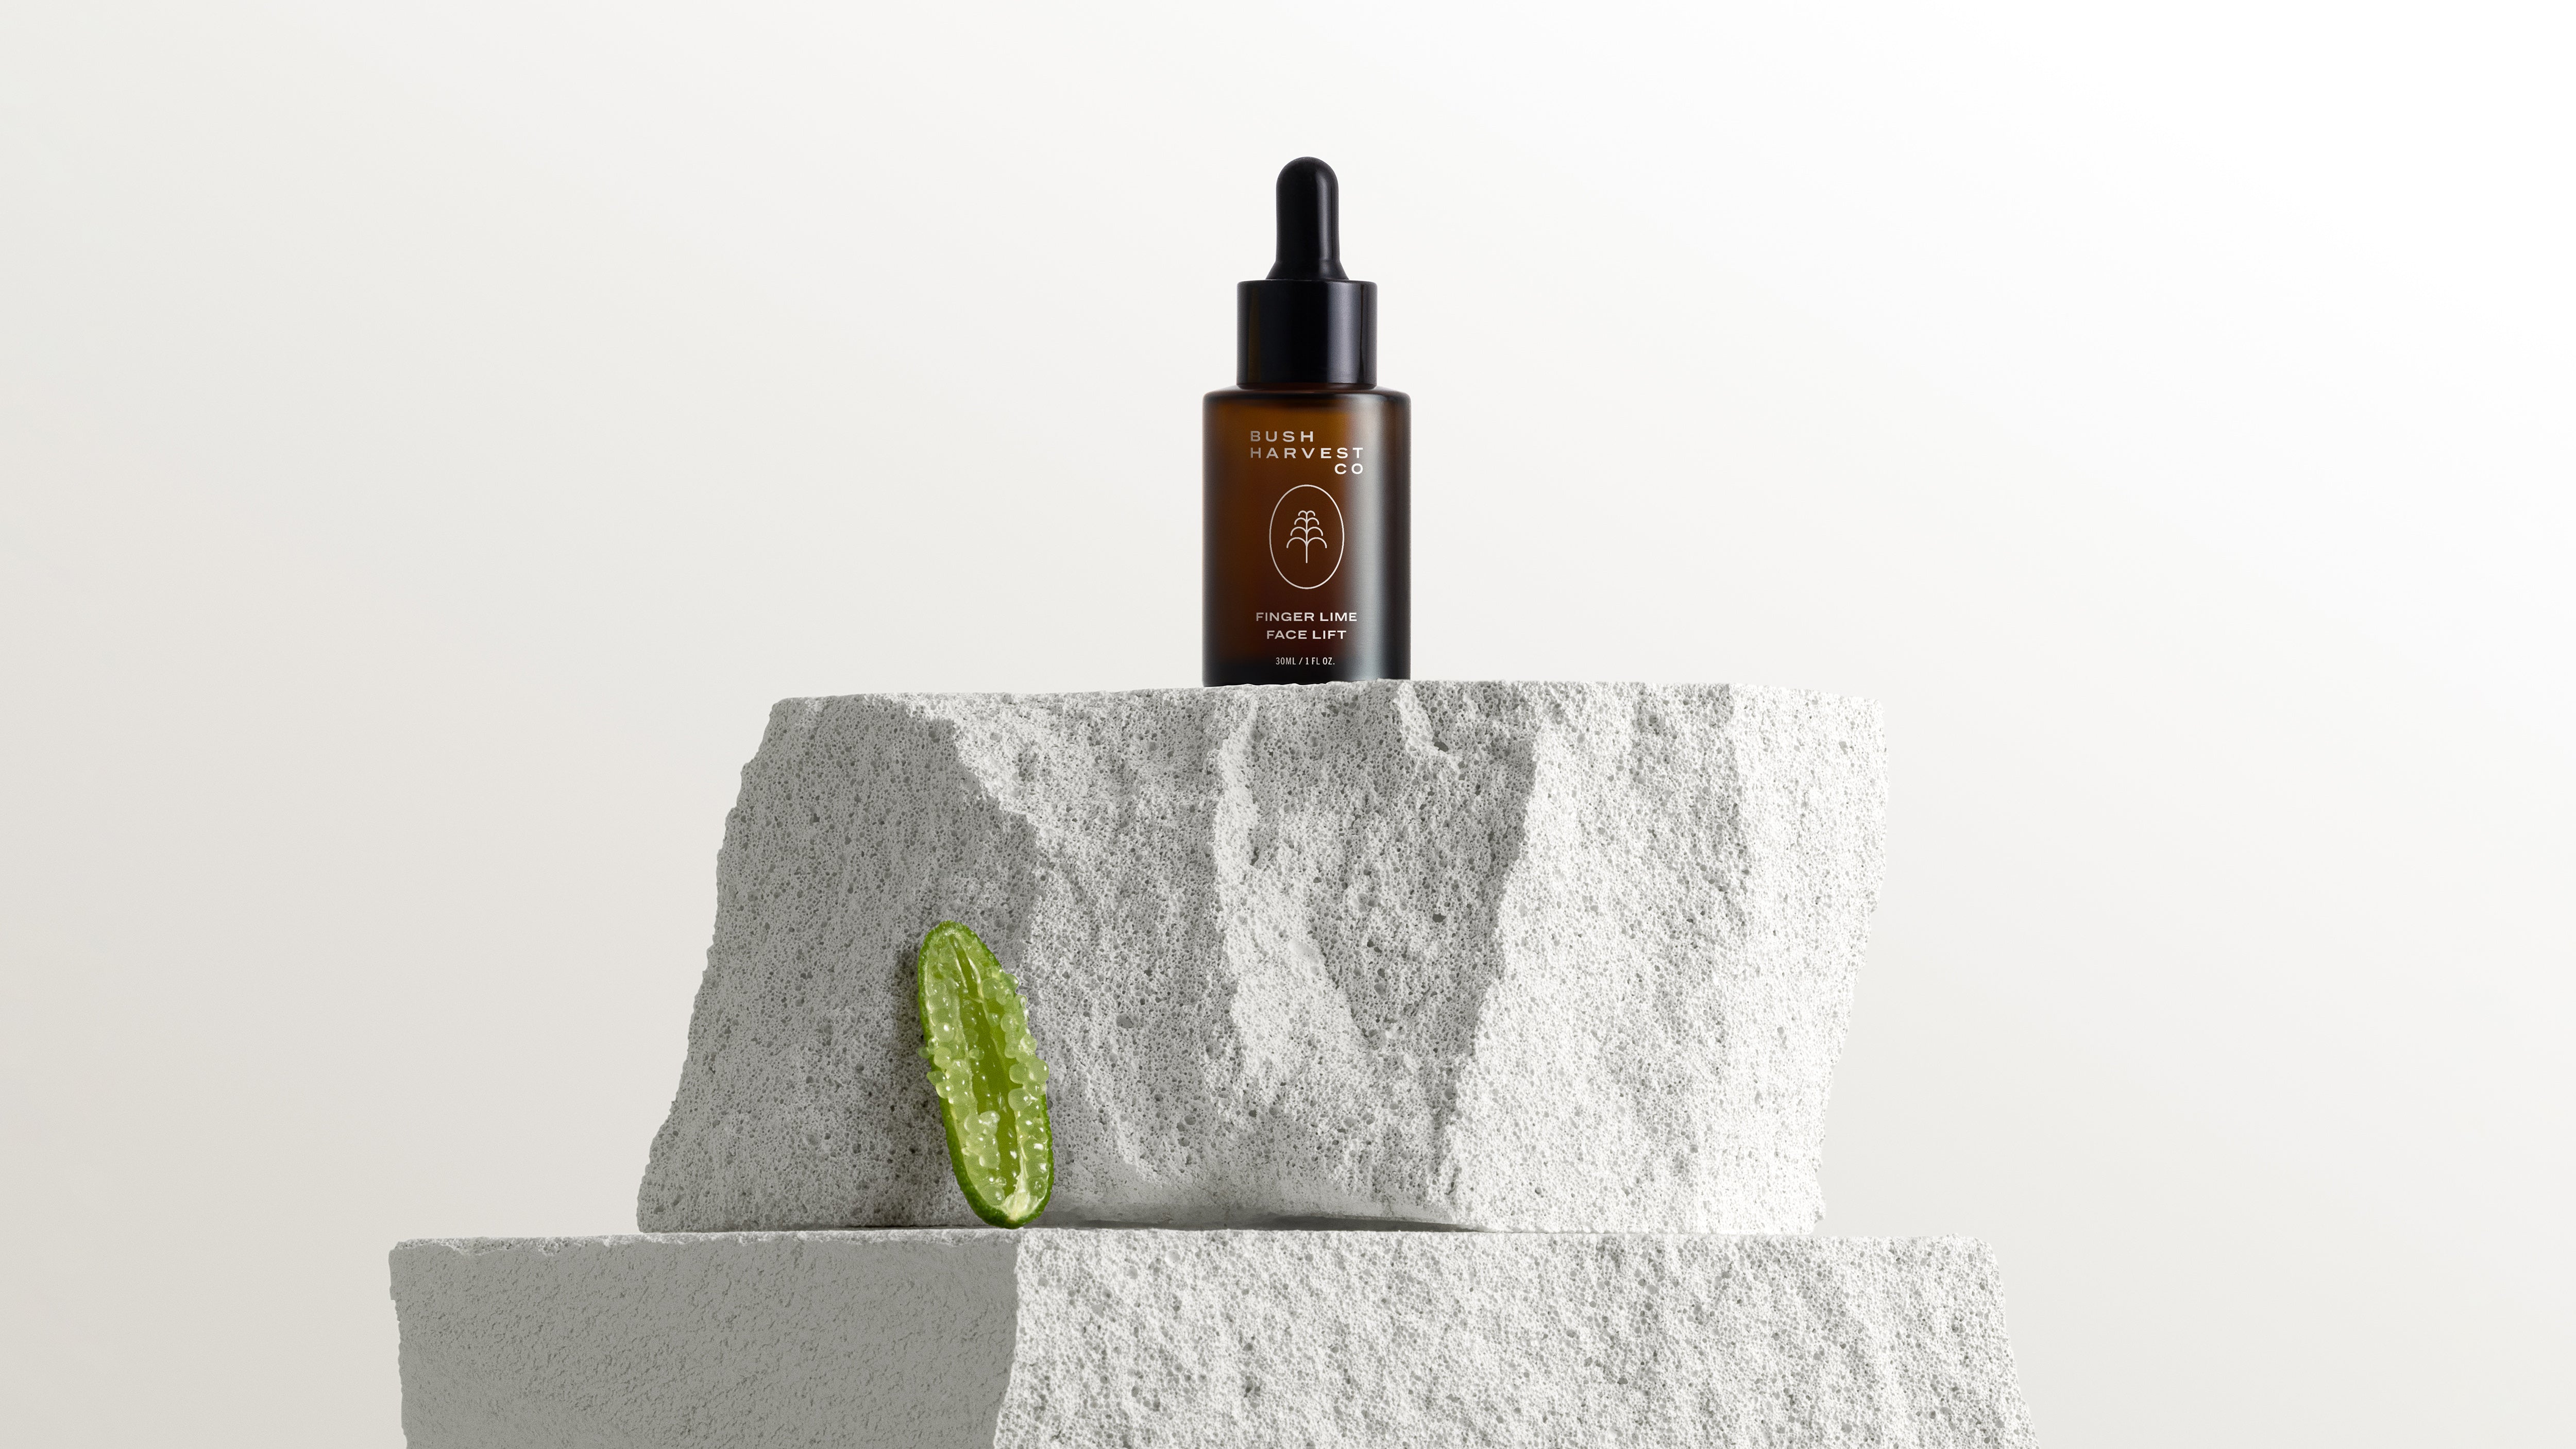 Finger Lime Face Lift Serum Styled Image